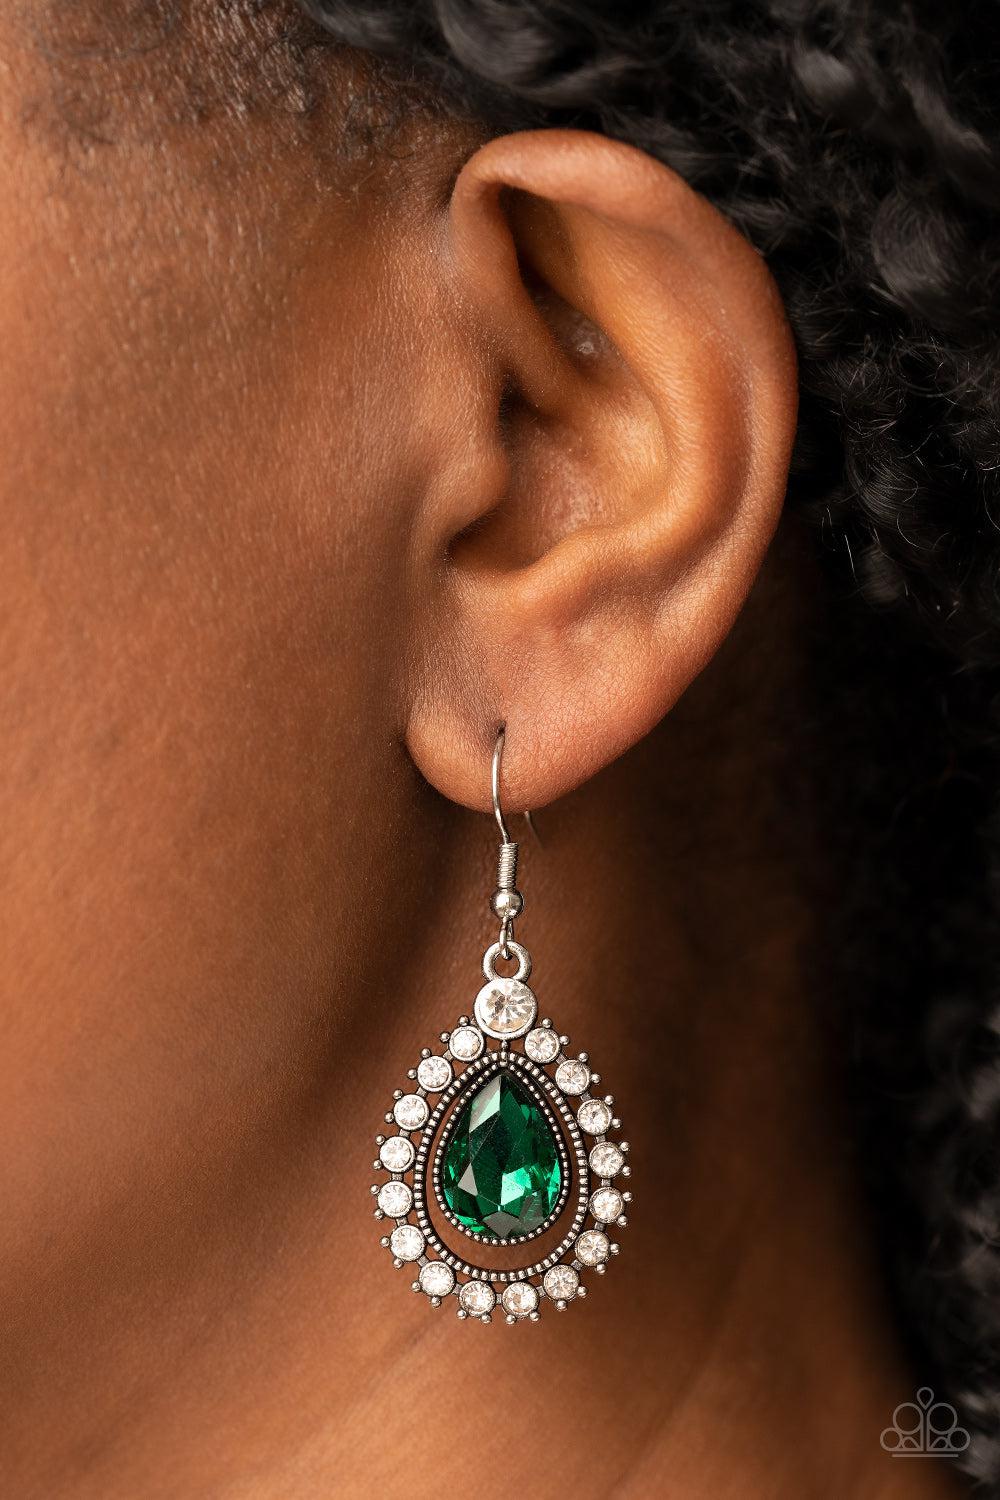 Divinely Duchess Green Rhinestone Earrings - Paparazzi Accessories-on model - CarasShop.com - $5 Jewelry by Cara Jewels